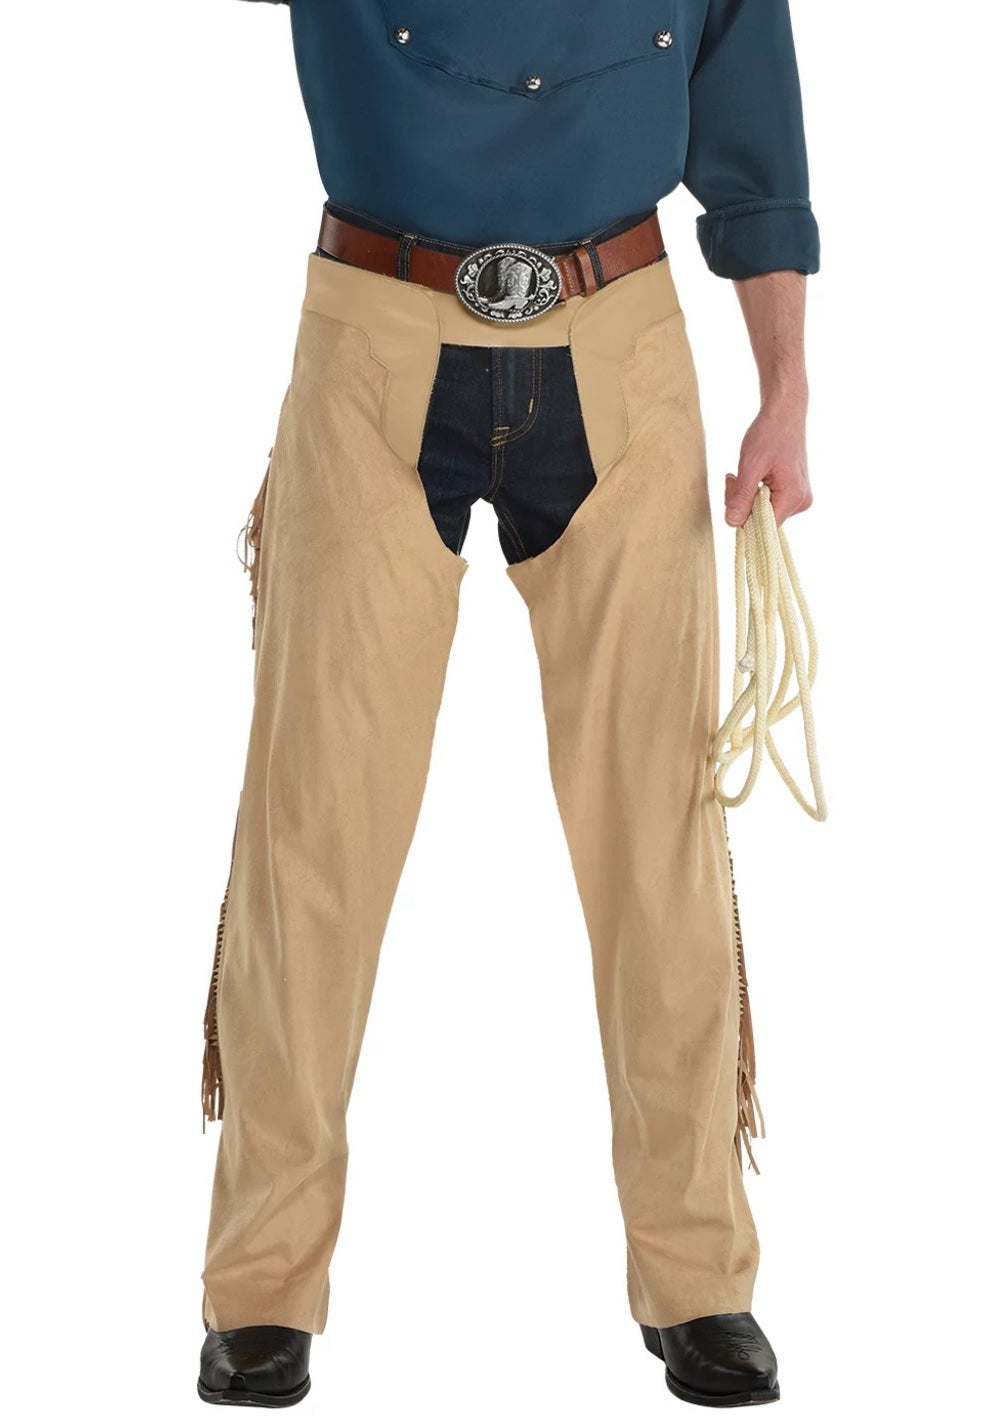 Tan chaps with fringe on the sides